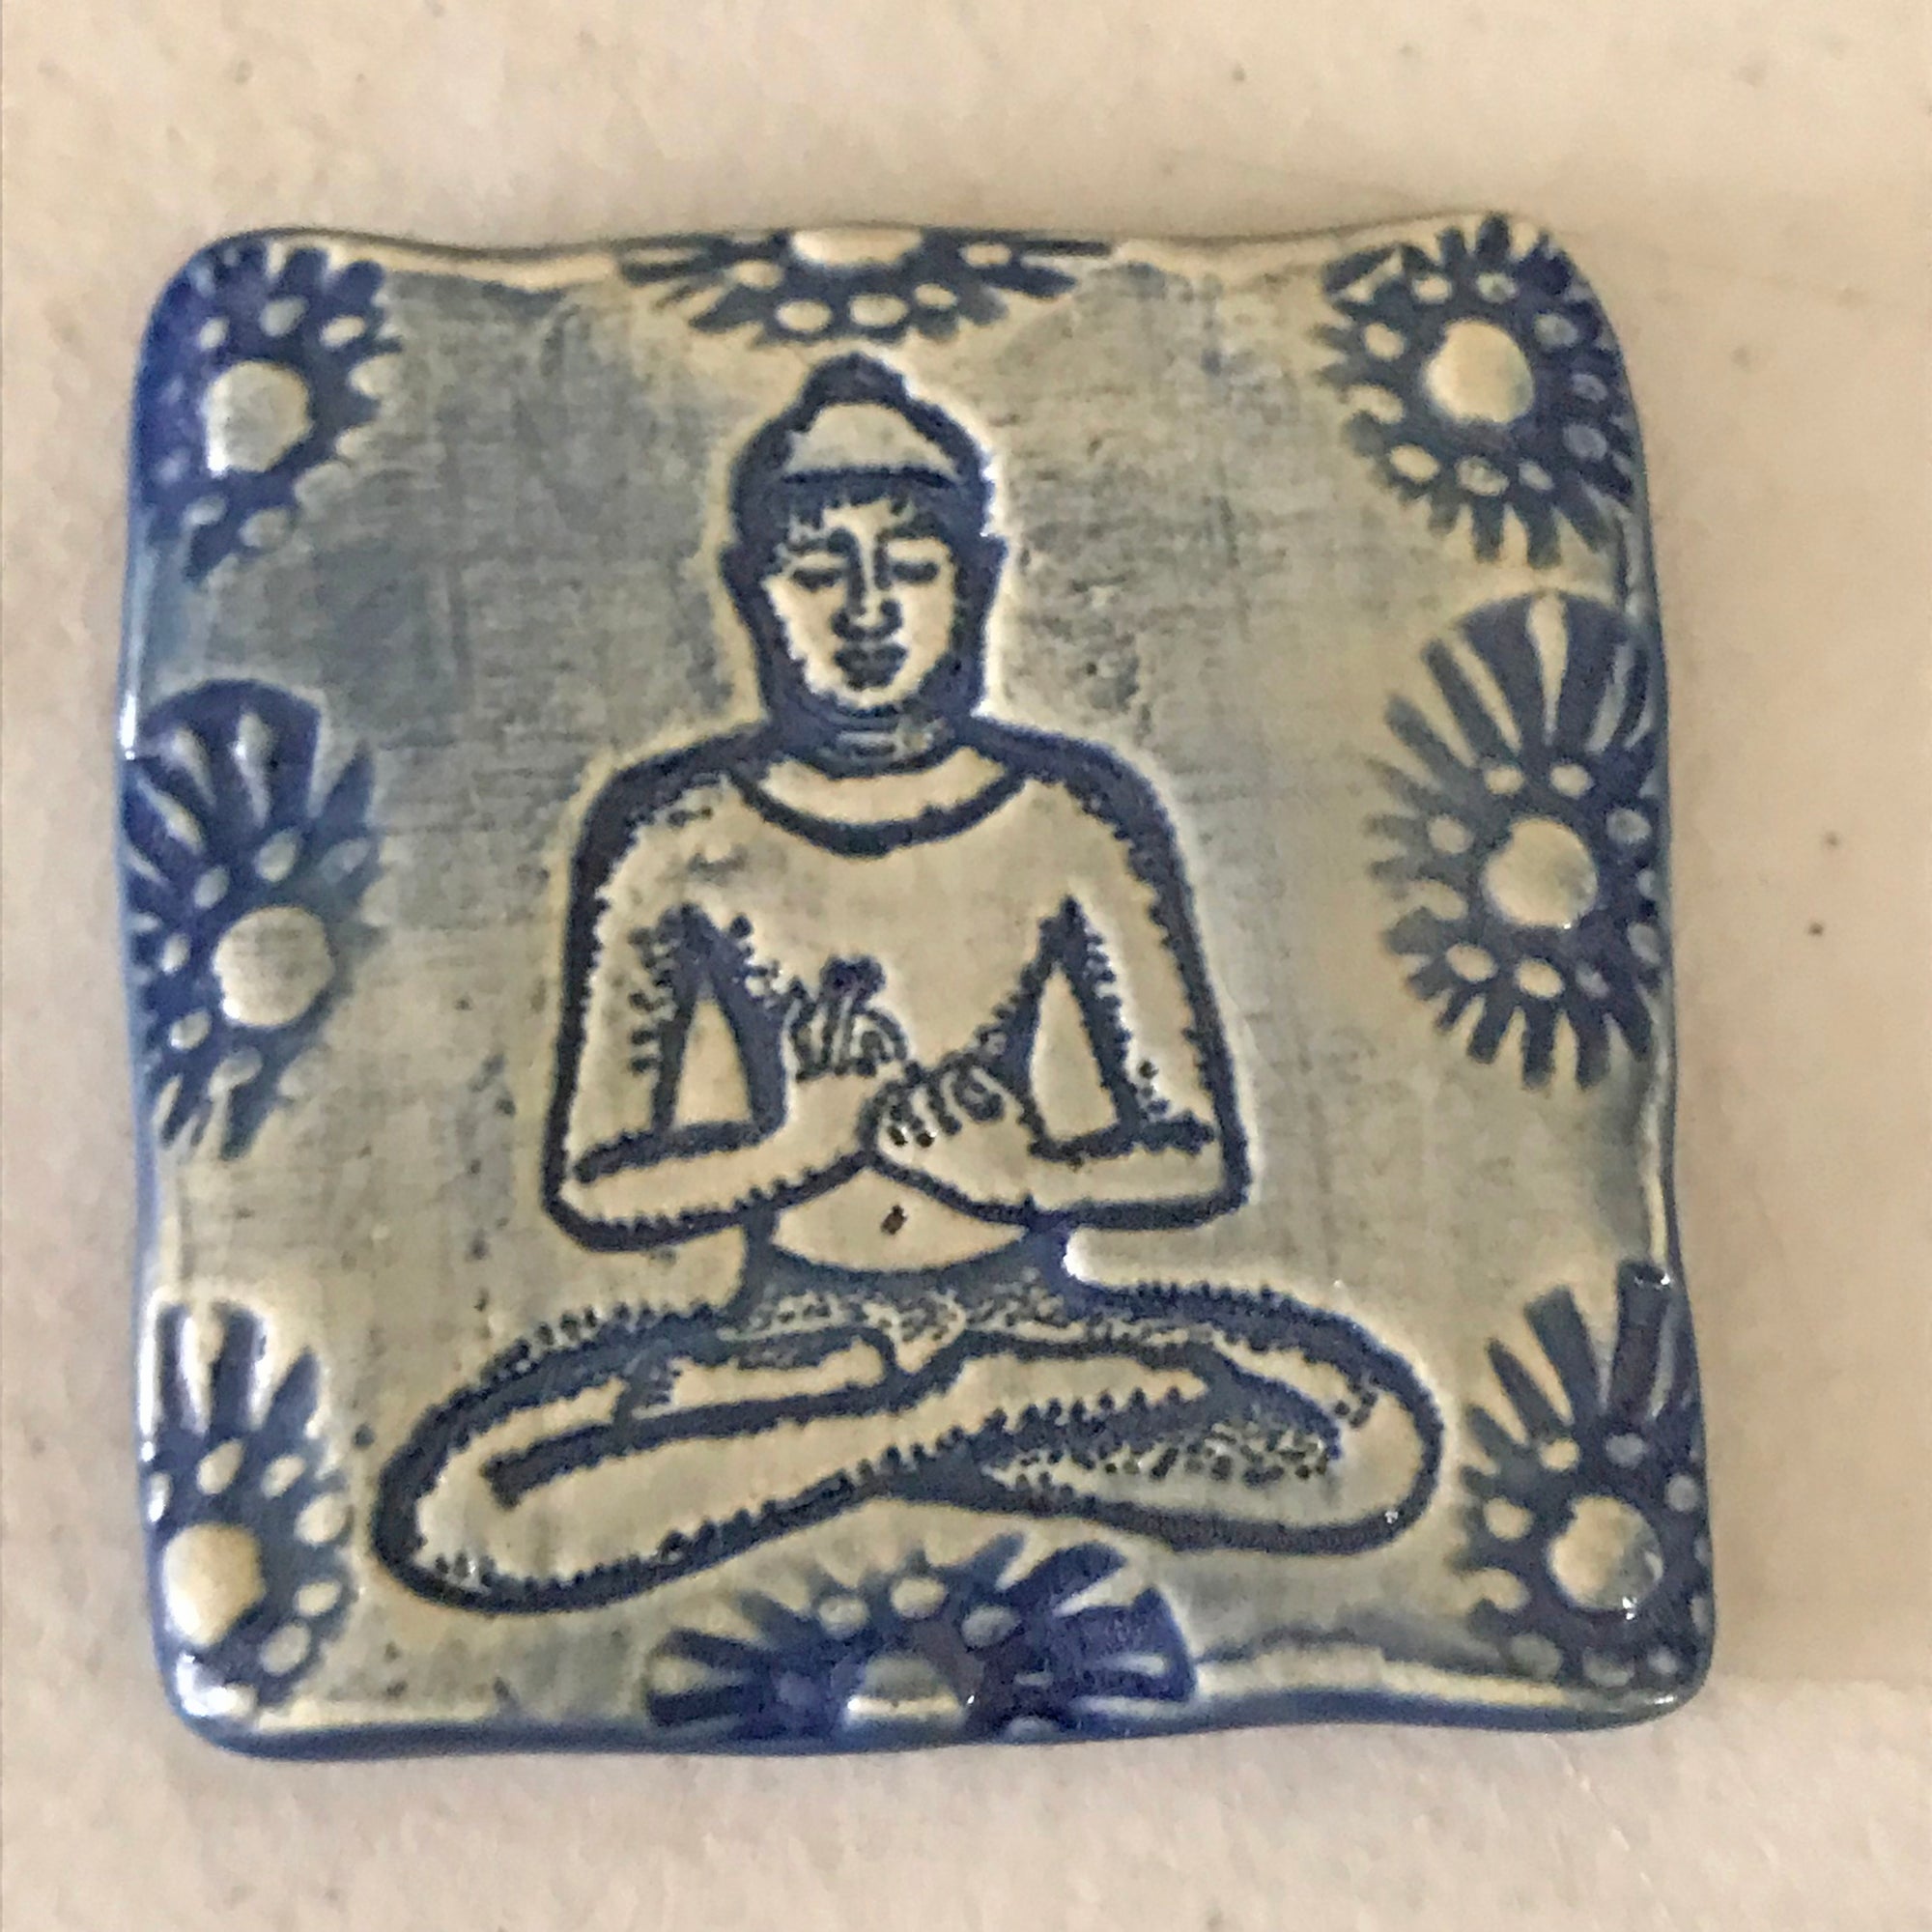 Magnet with Buddha image.  Handmade and created by the artisans of Oerth Studio.